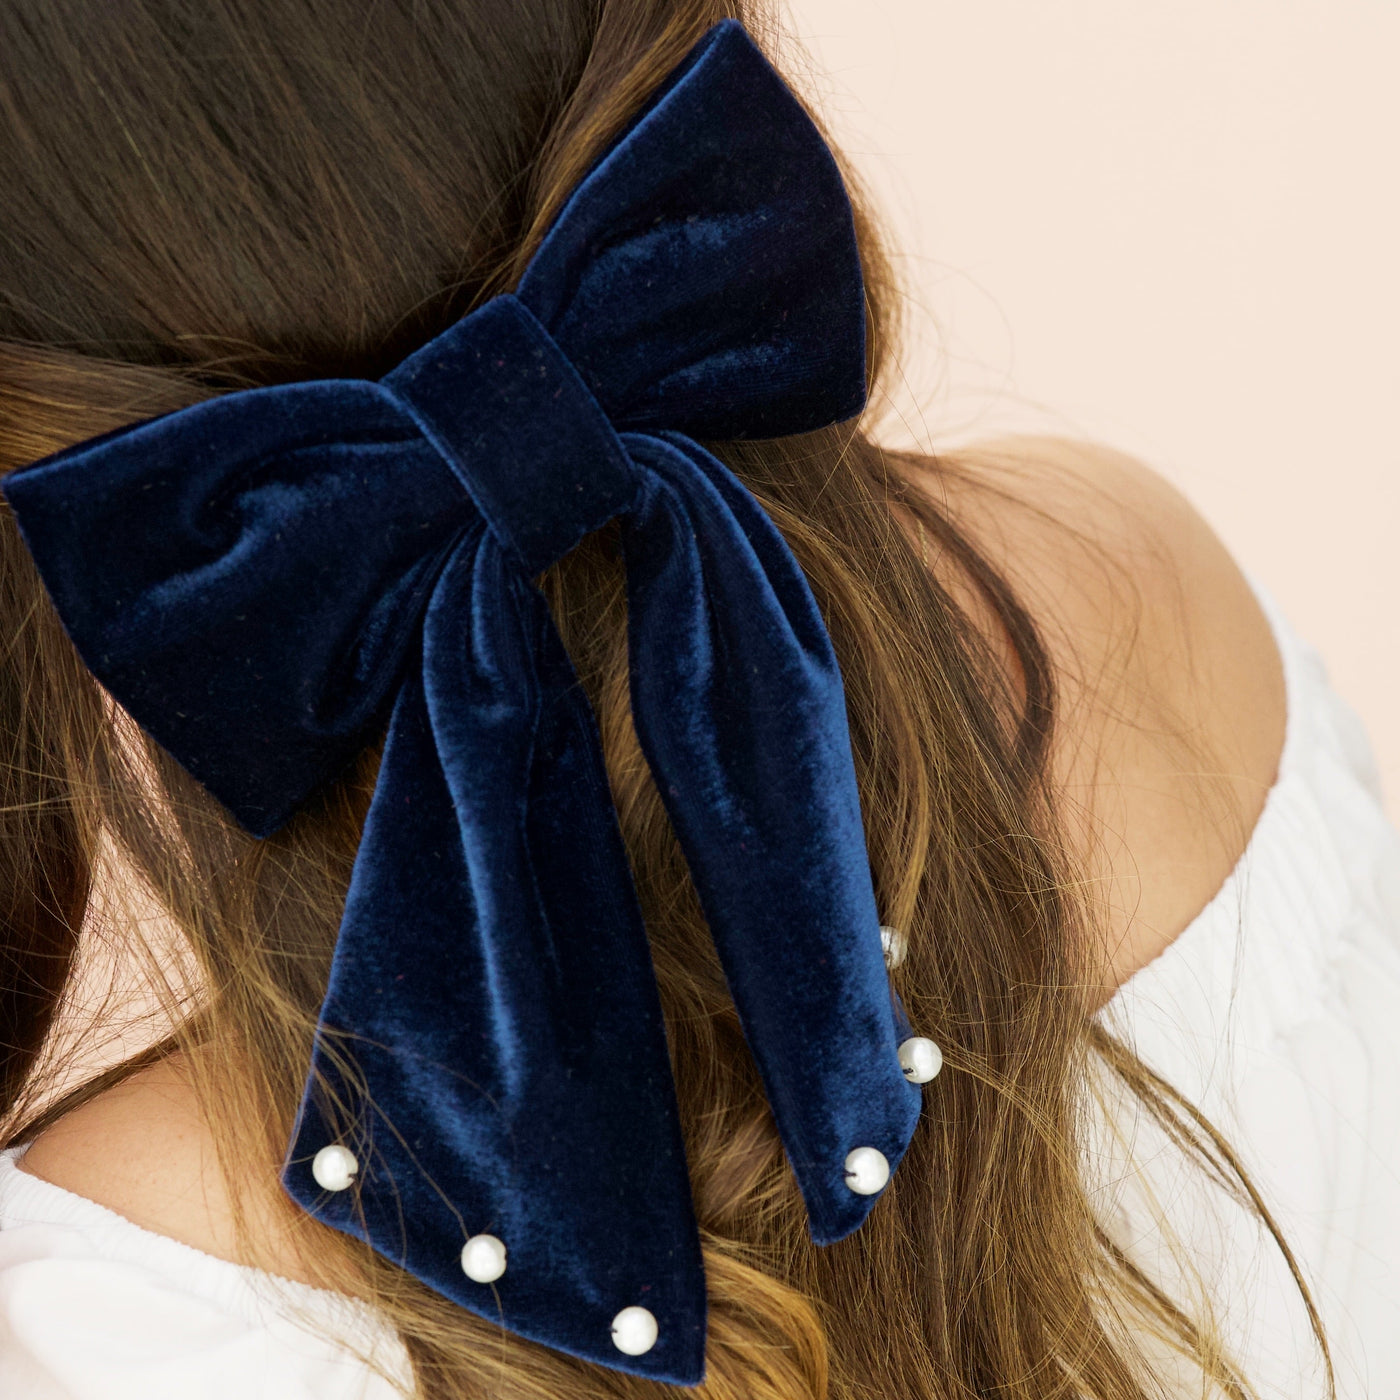 Moño - Large Blue Bow / pearls